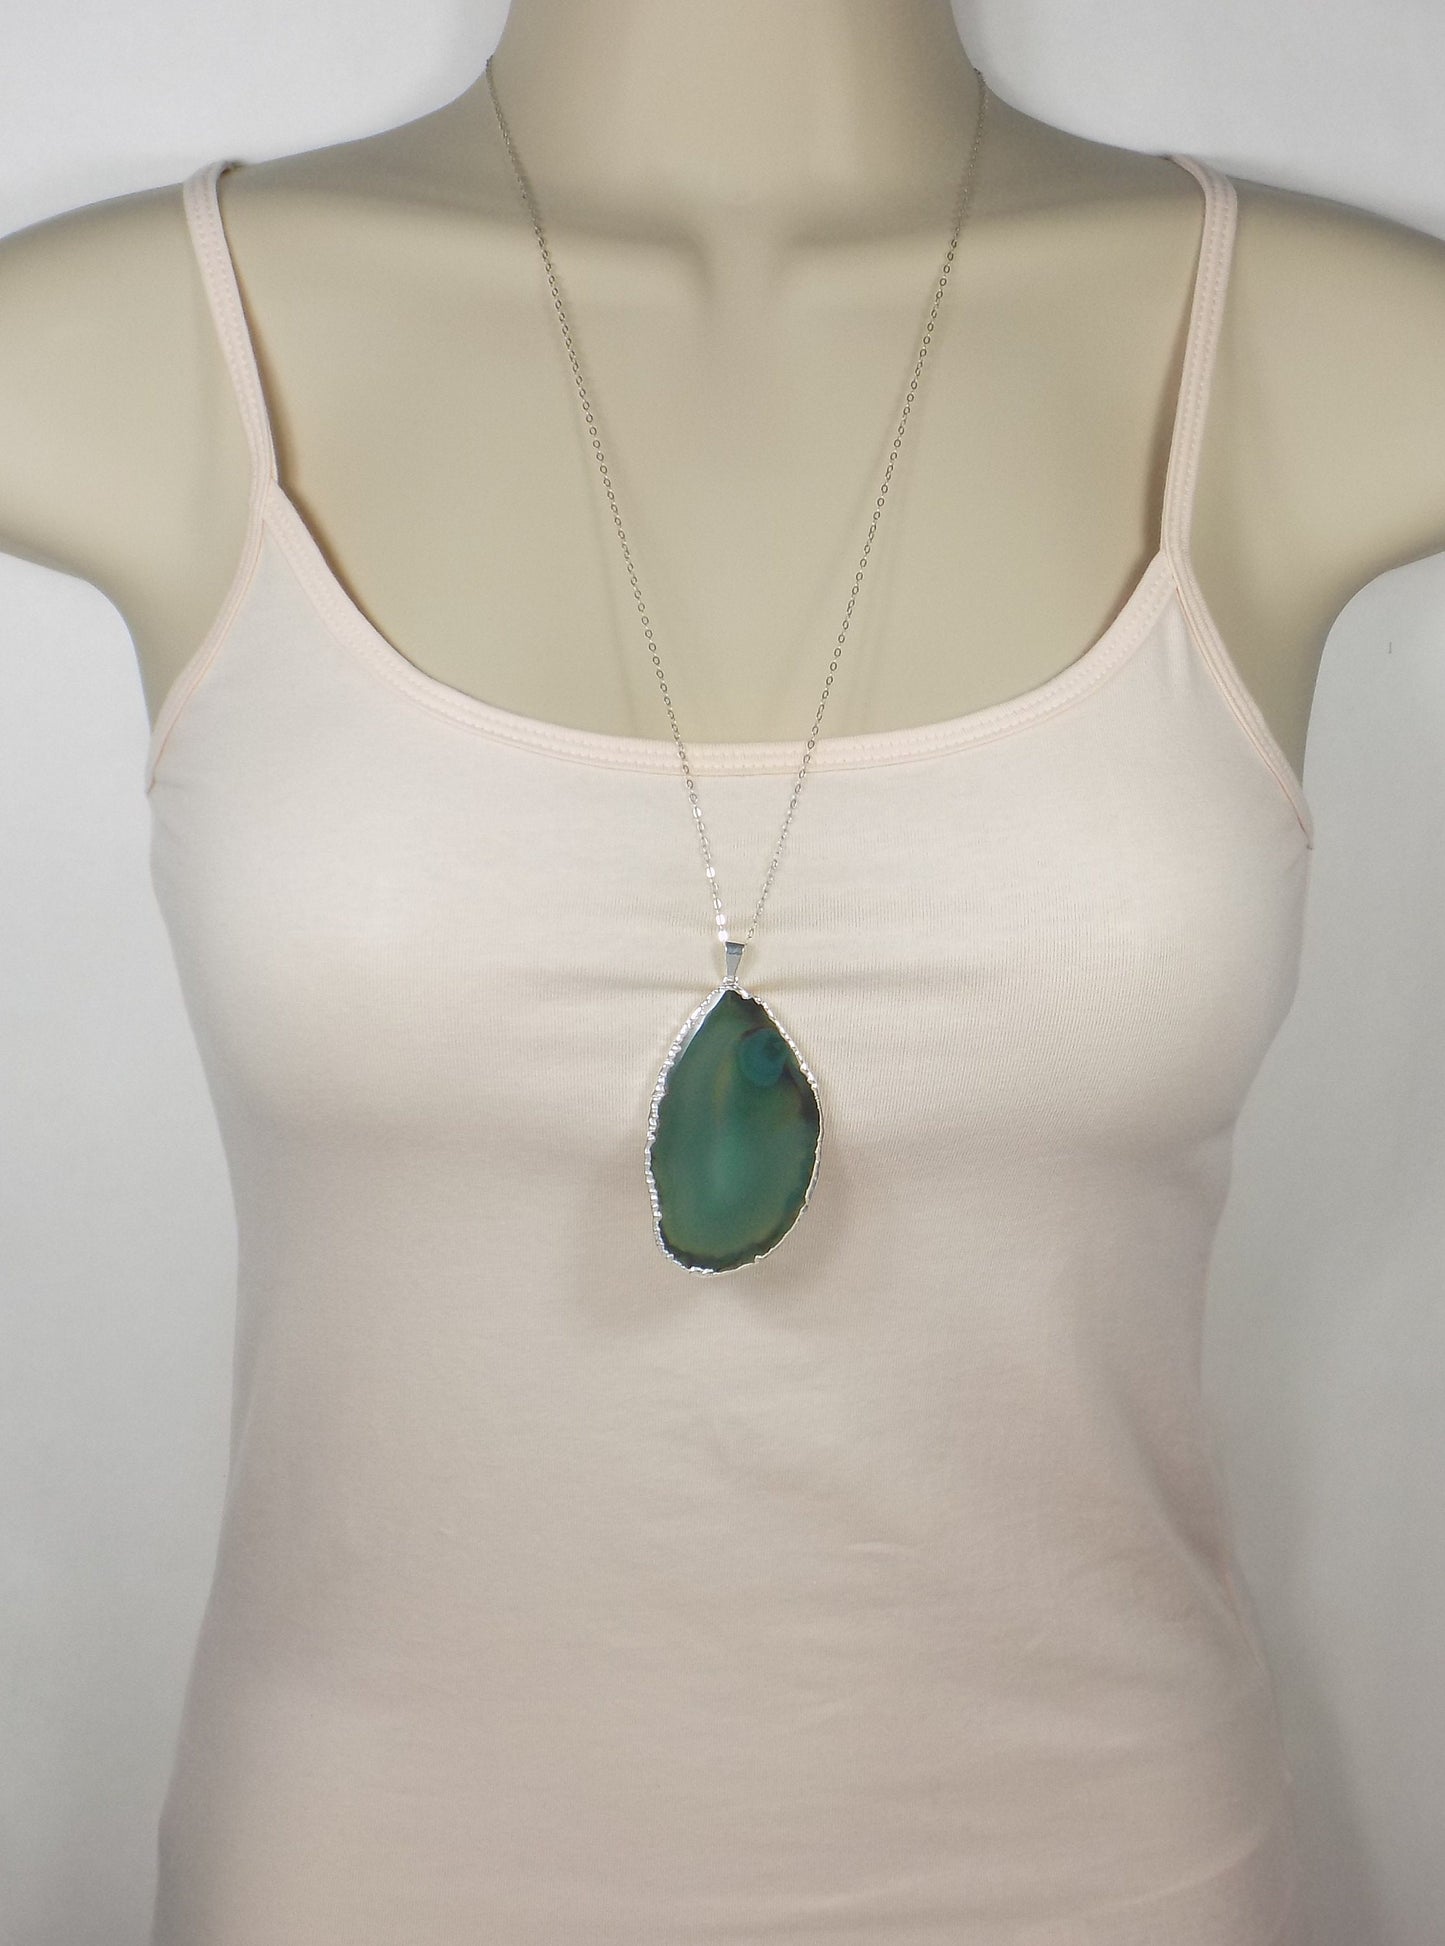 Agate Necklace Silver - Green Agate Pendant Necklace